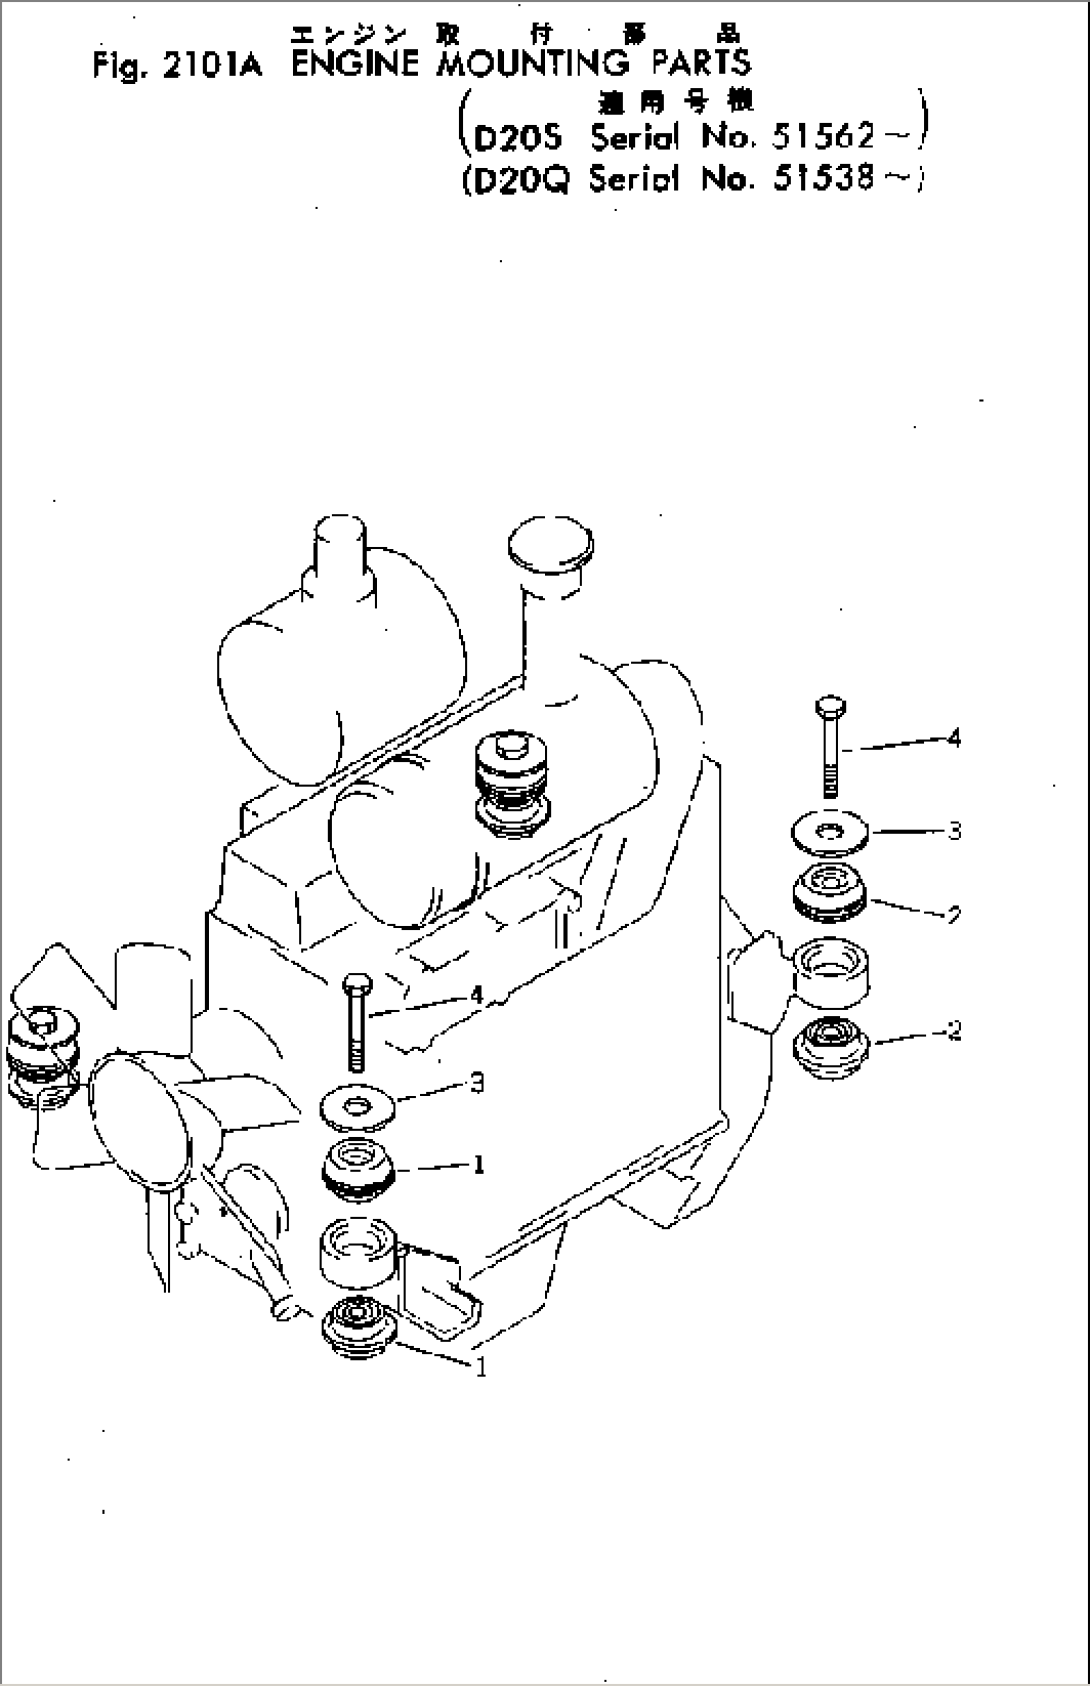 ENGINE MOUNTING PARTS(#51562-)